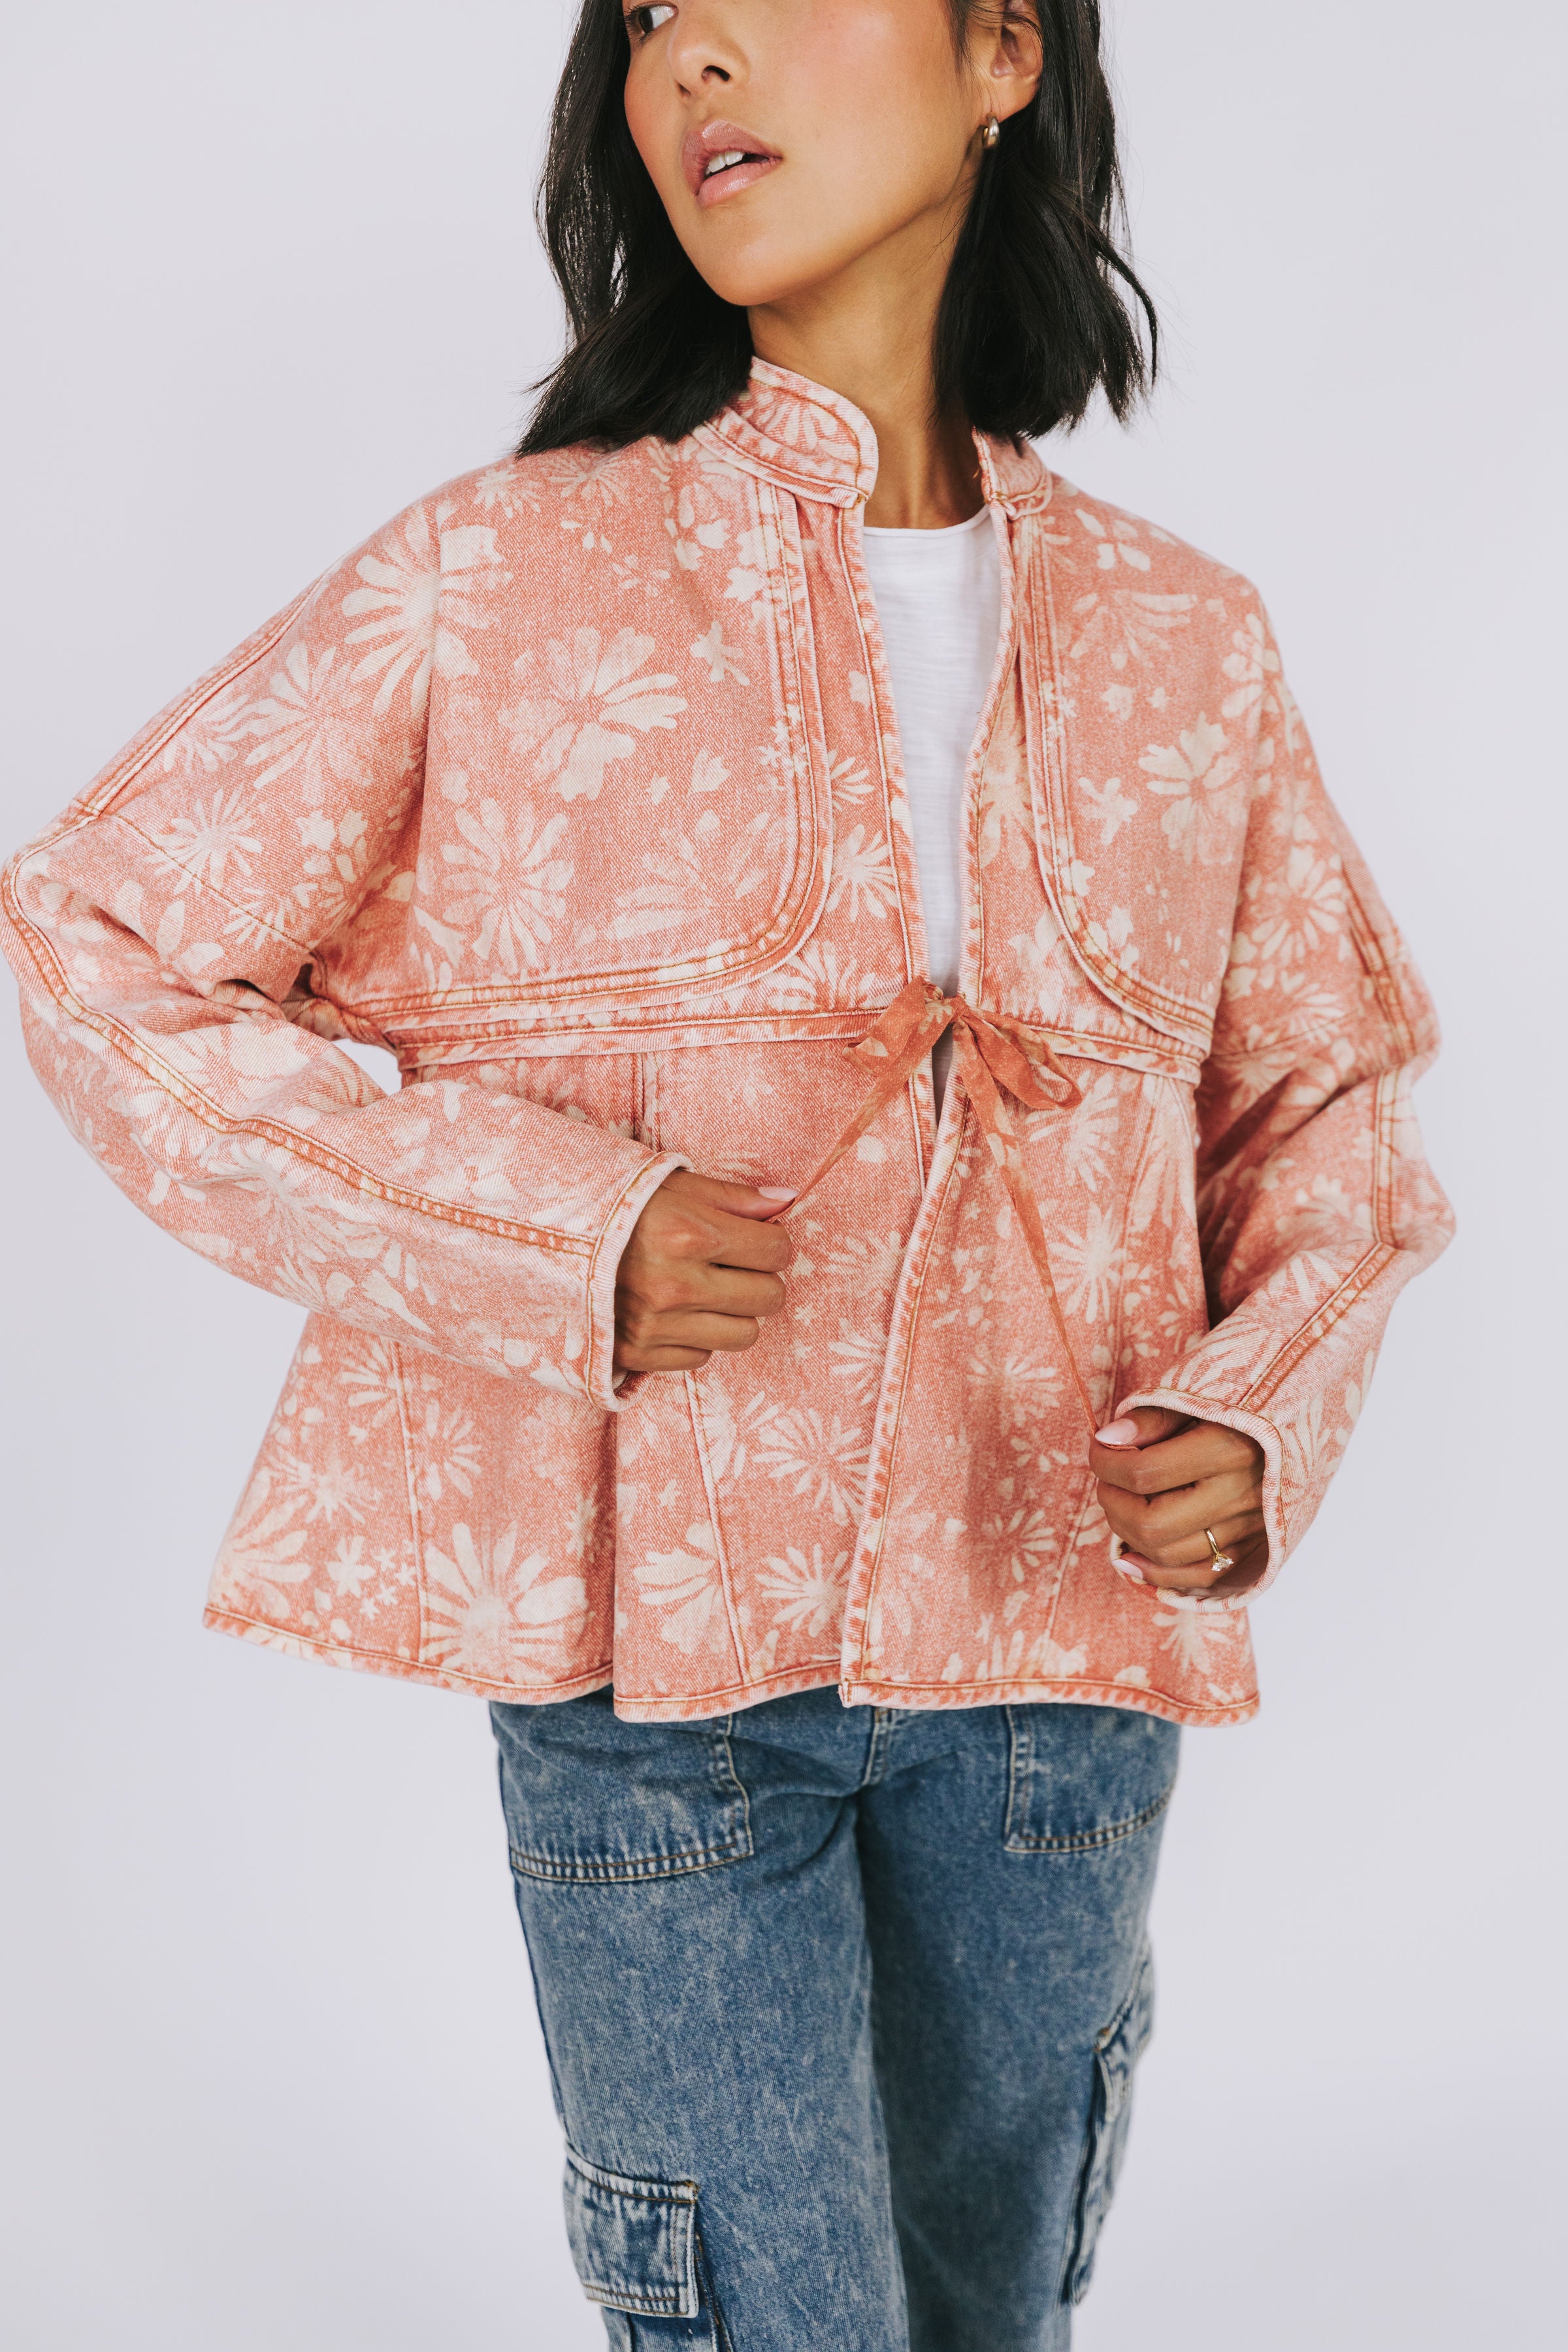 FREE PEOPLE - Hit The Slopes Fleece Jacket - 2 Colors!